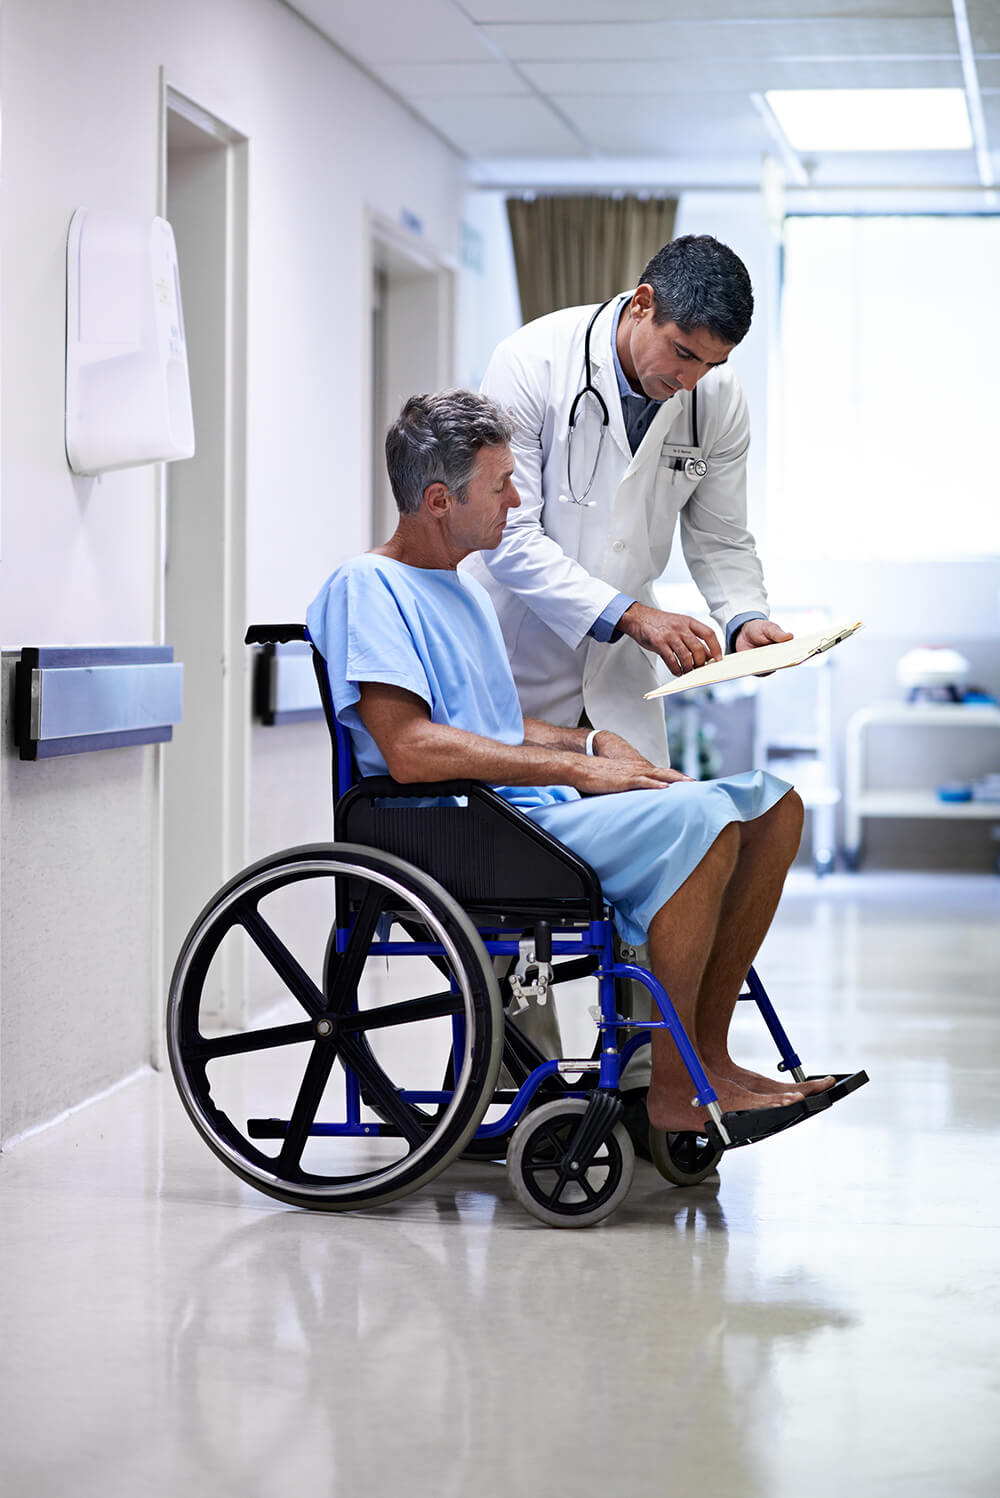 Wearing a hospital gown and sitting in a wheelchair in a hospital hallway, a man listens as a doctor stands over him showing him information on a clipboard. The Clarkson Firm helps people in Alabama with personal injury cases and civil litigation.